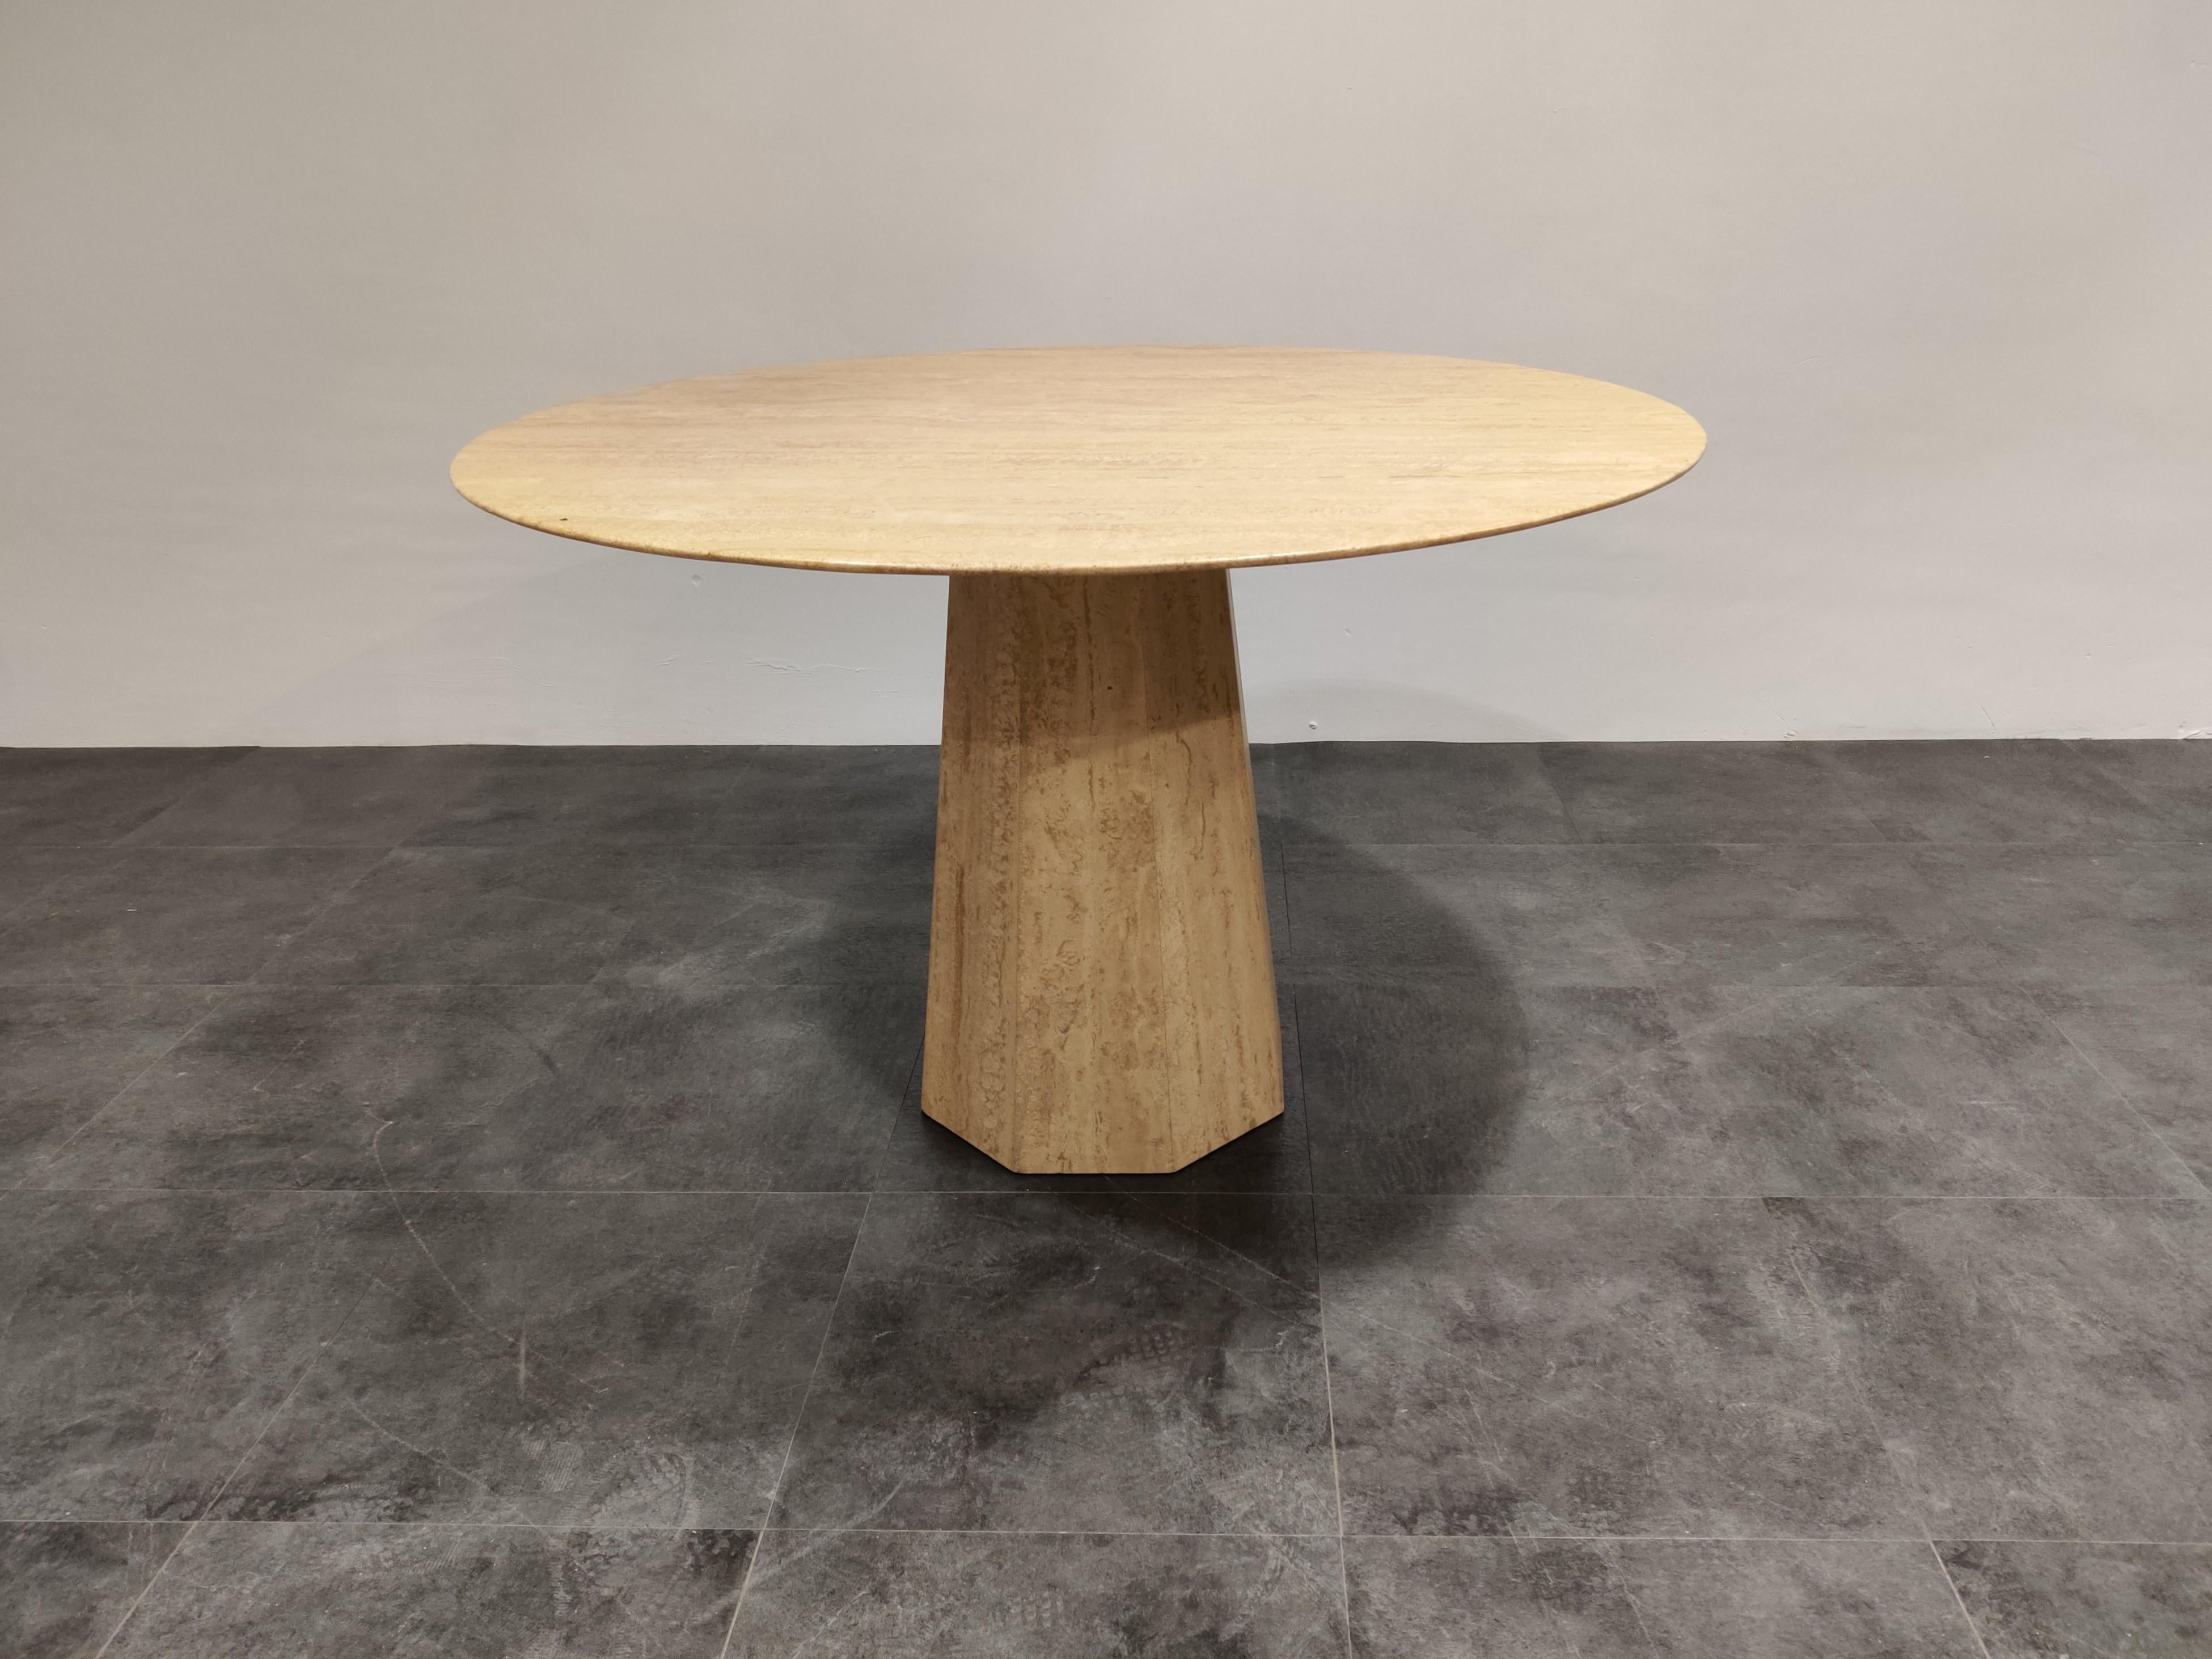 Beautiful octagonal conical base dining or center table made from travertine stone.

The table has a beautiful base supporting a round finely finished top.

Good condition

1970s, Italy

Measures: Height 72cm/28.34